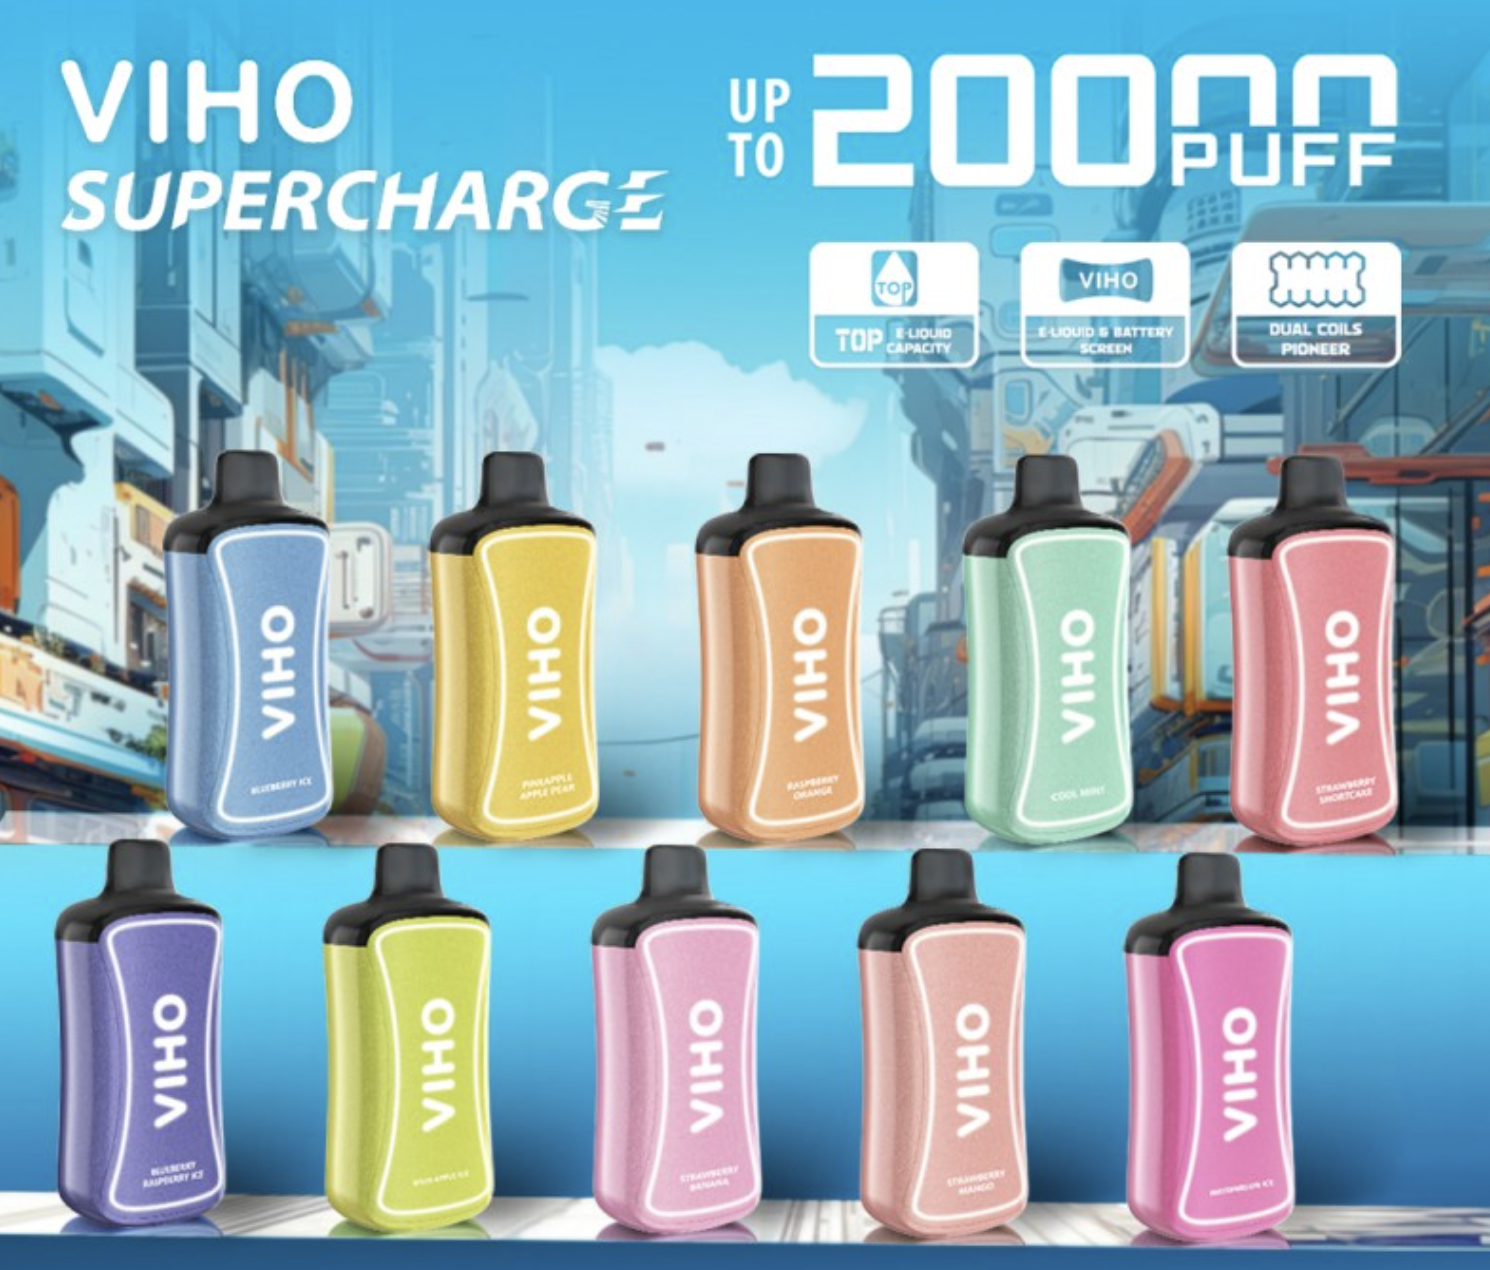 Review Viho Supercharge 20000 puffs